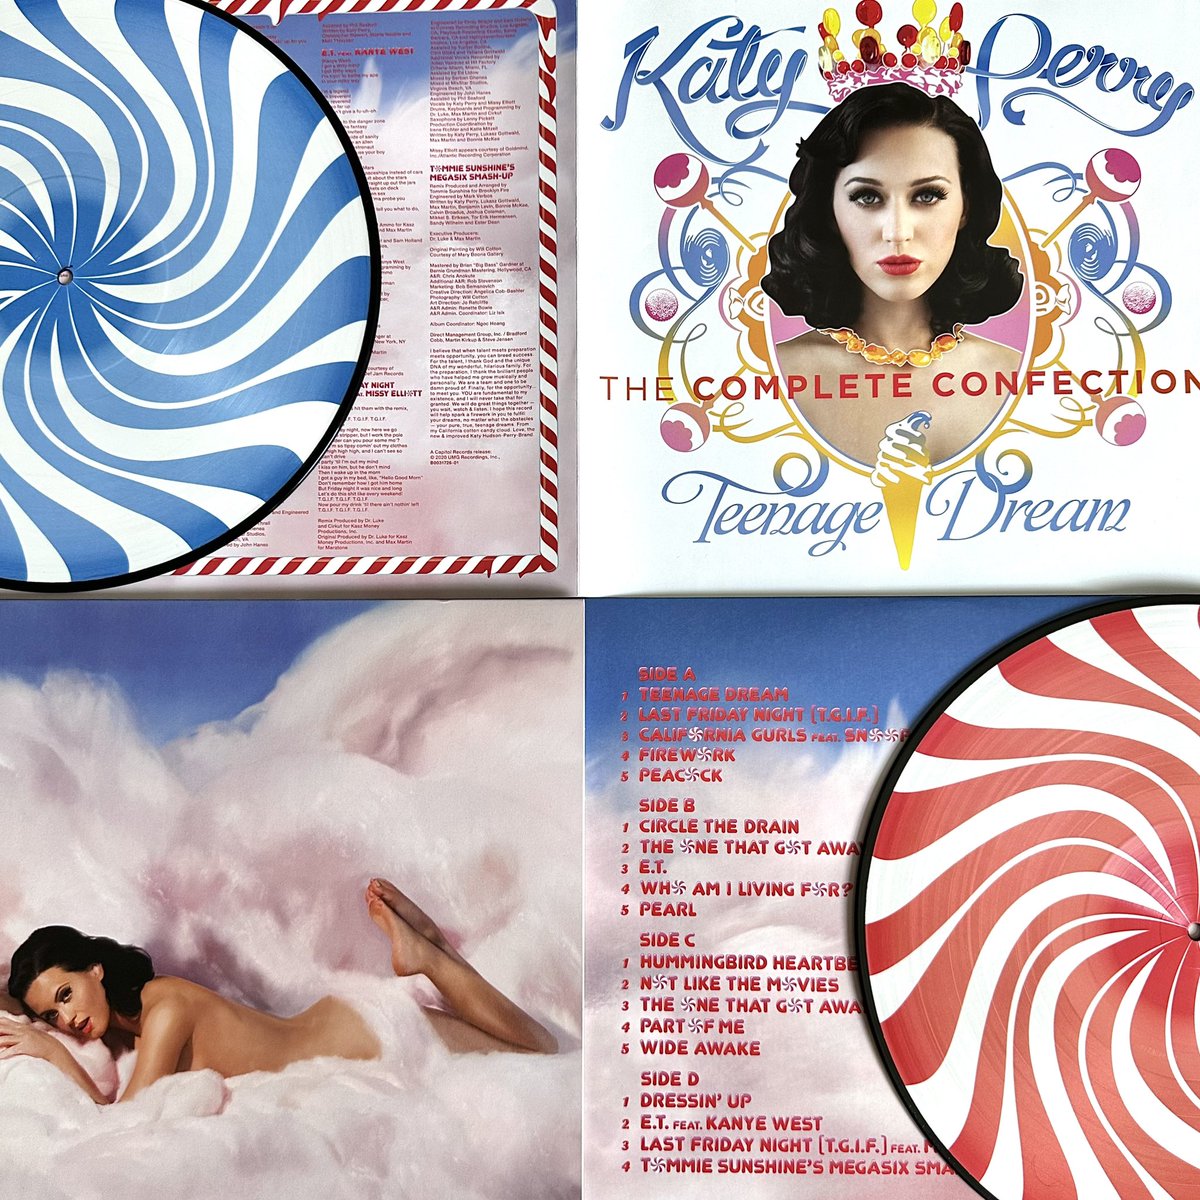 COMING FRIDAY:

Katy Perry - Teenage Dream: The Complete Confection peppermint picture disc vinyl

9 copies | $59.99
Unboxed Copy | $54.99

Unboxing: https://t.co/zzFxerno1T https://t.co/RabSbNuwzz